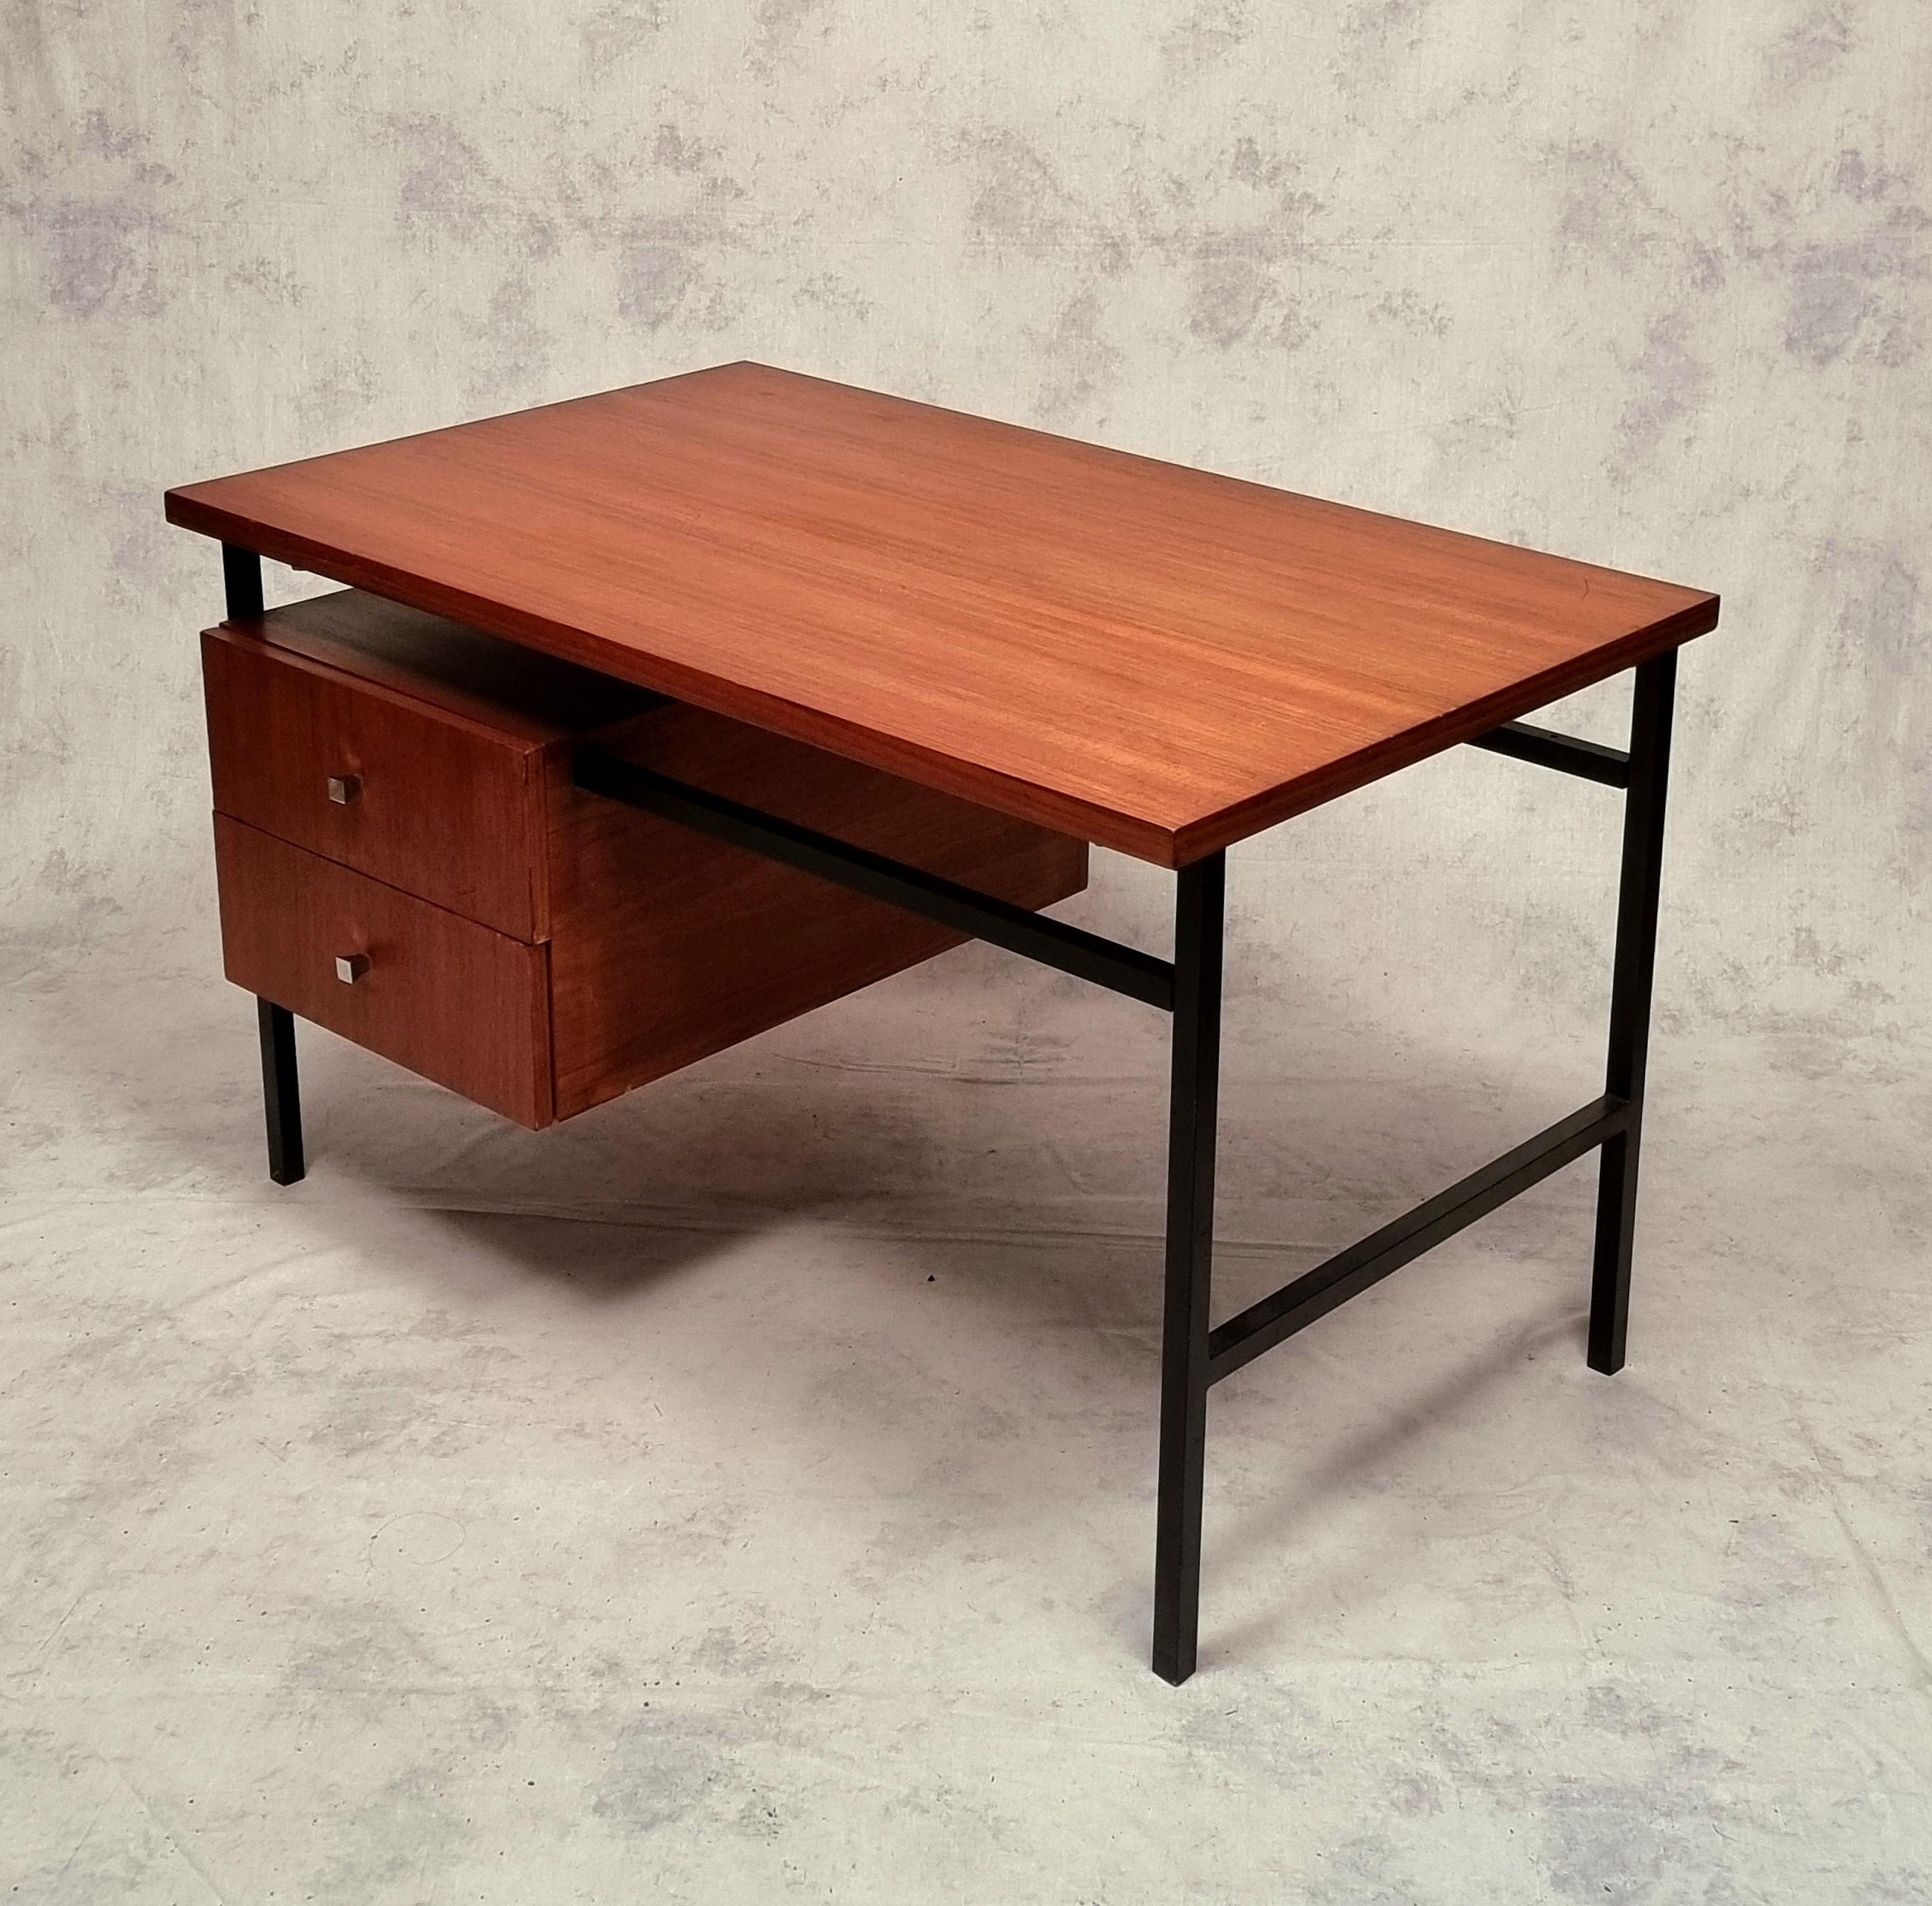 Modernist office by Luigi Bartolini. Crafted in teak, this desk is composed of a beautiful teak wood top and a suspended box in the same wood with stylized chrome metal handles. It is based on a black lacquered square tube structure typical of the